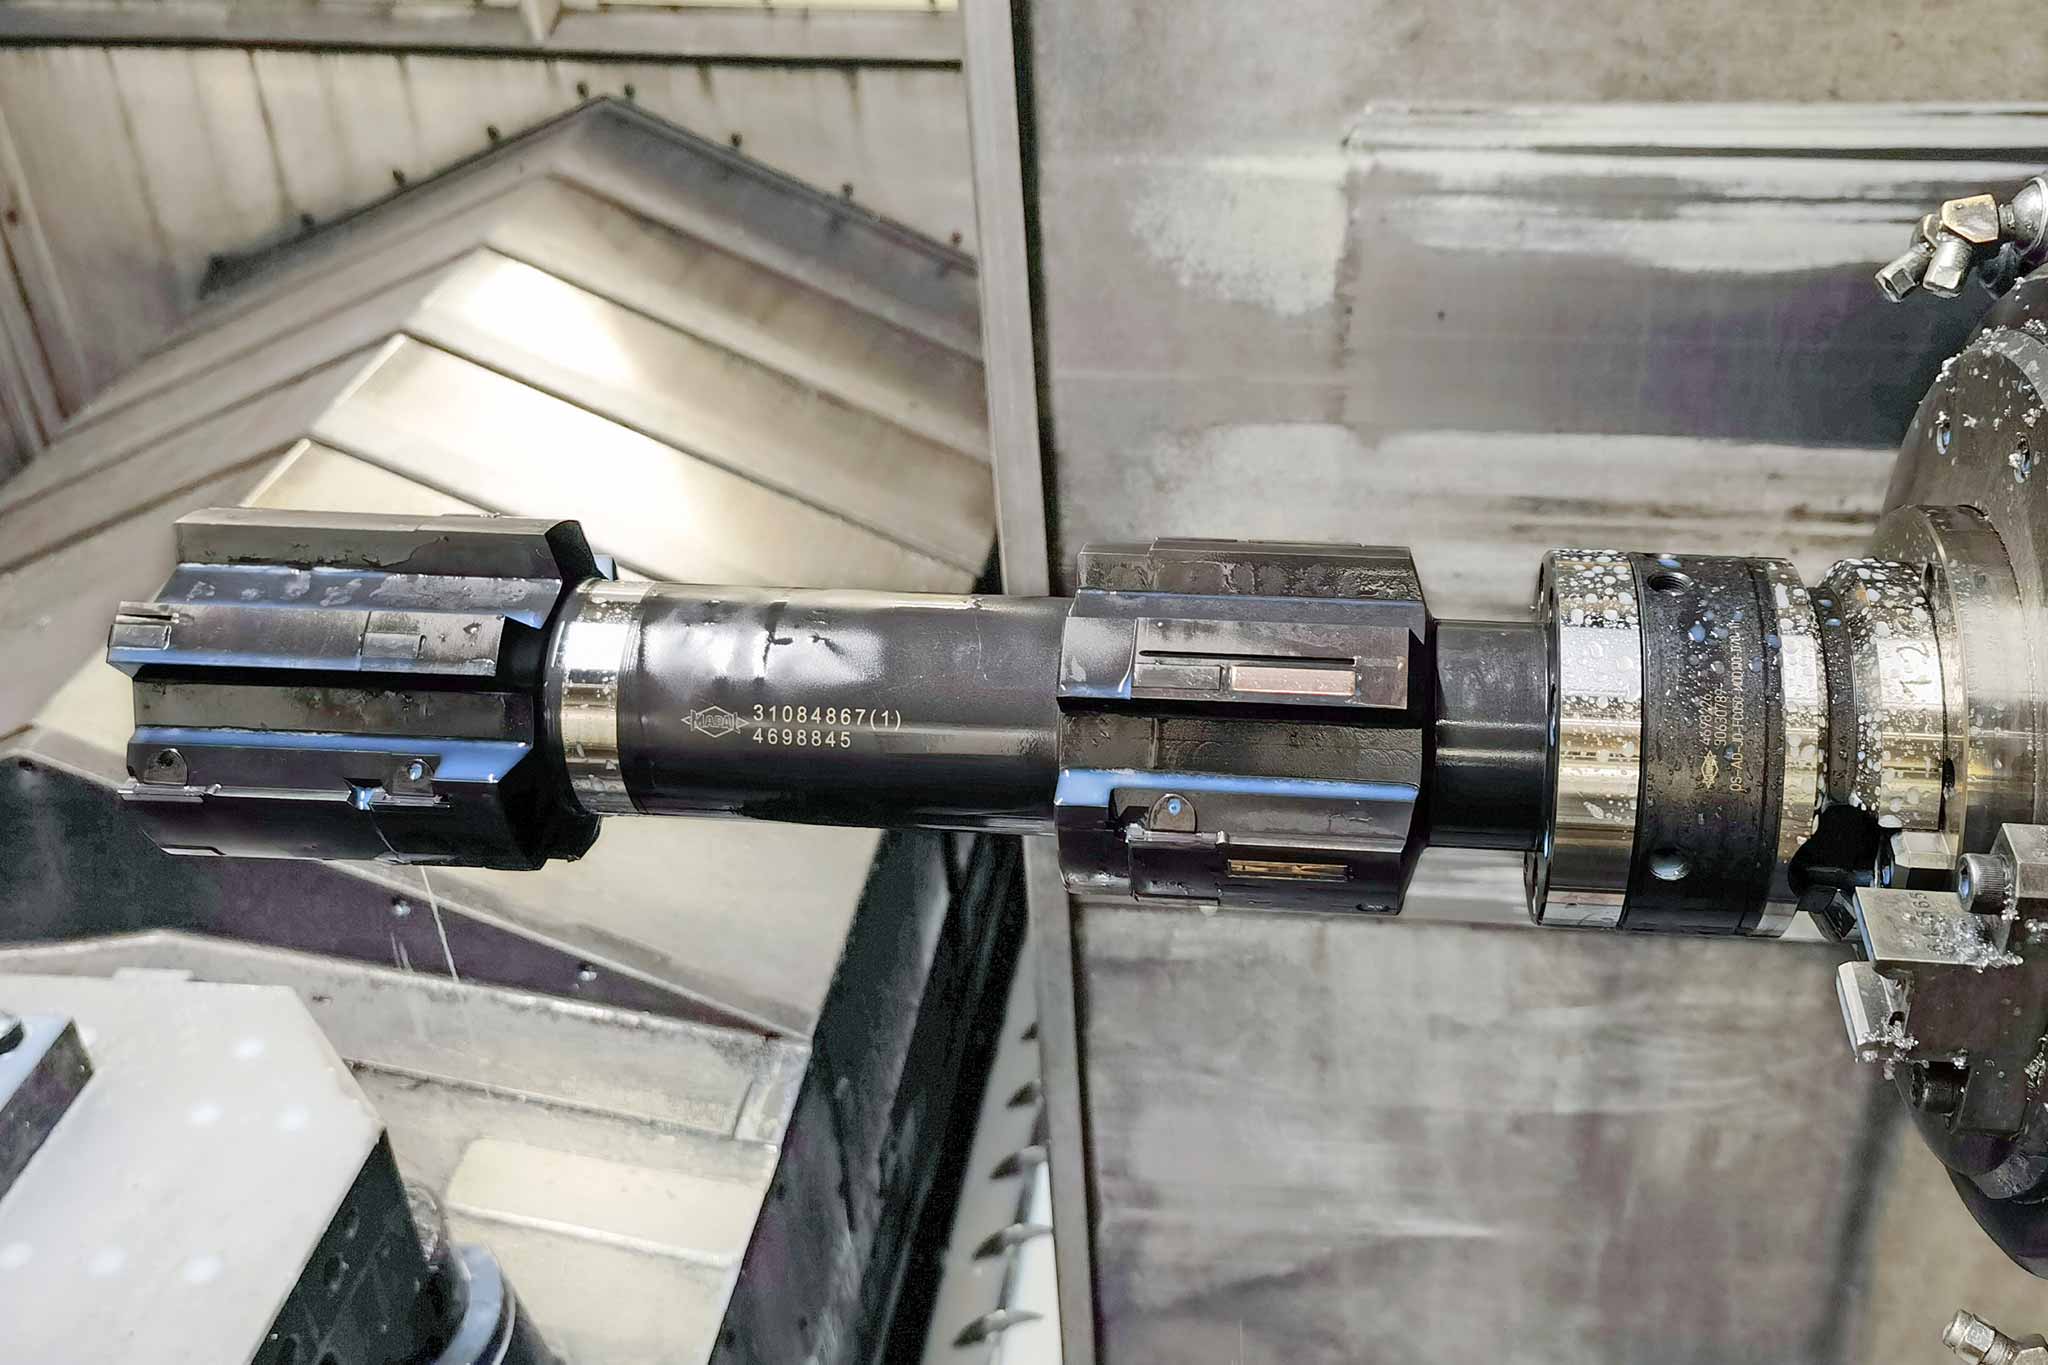 The picture shows the complete multi-stage fine boring tool from MAPAL that is used at Tornos SA.